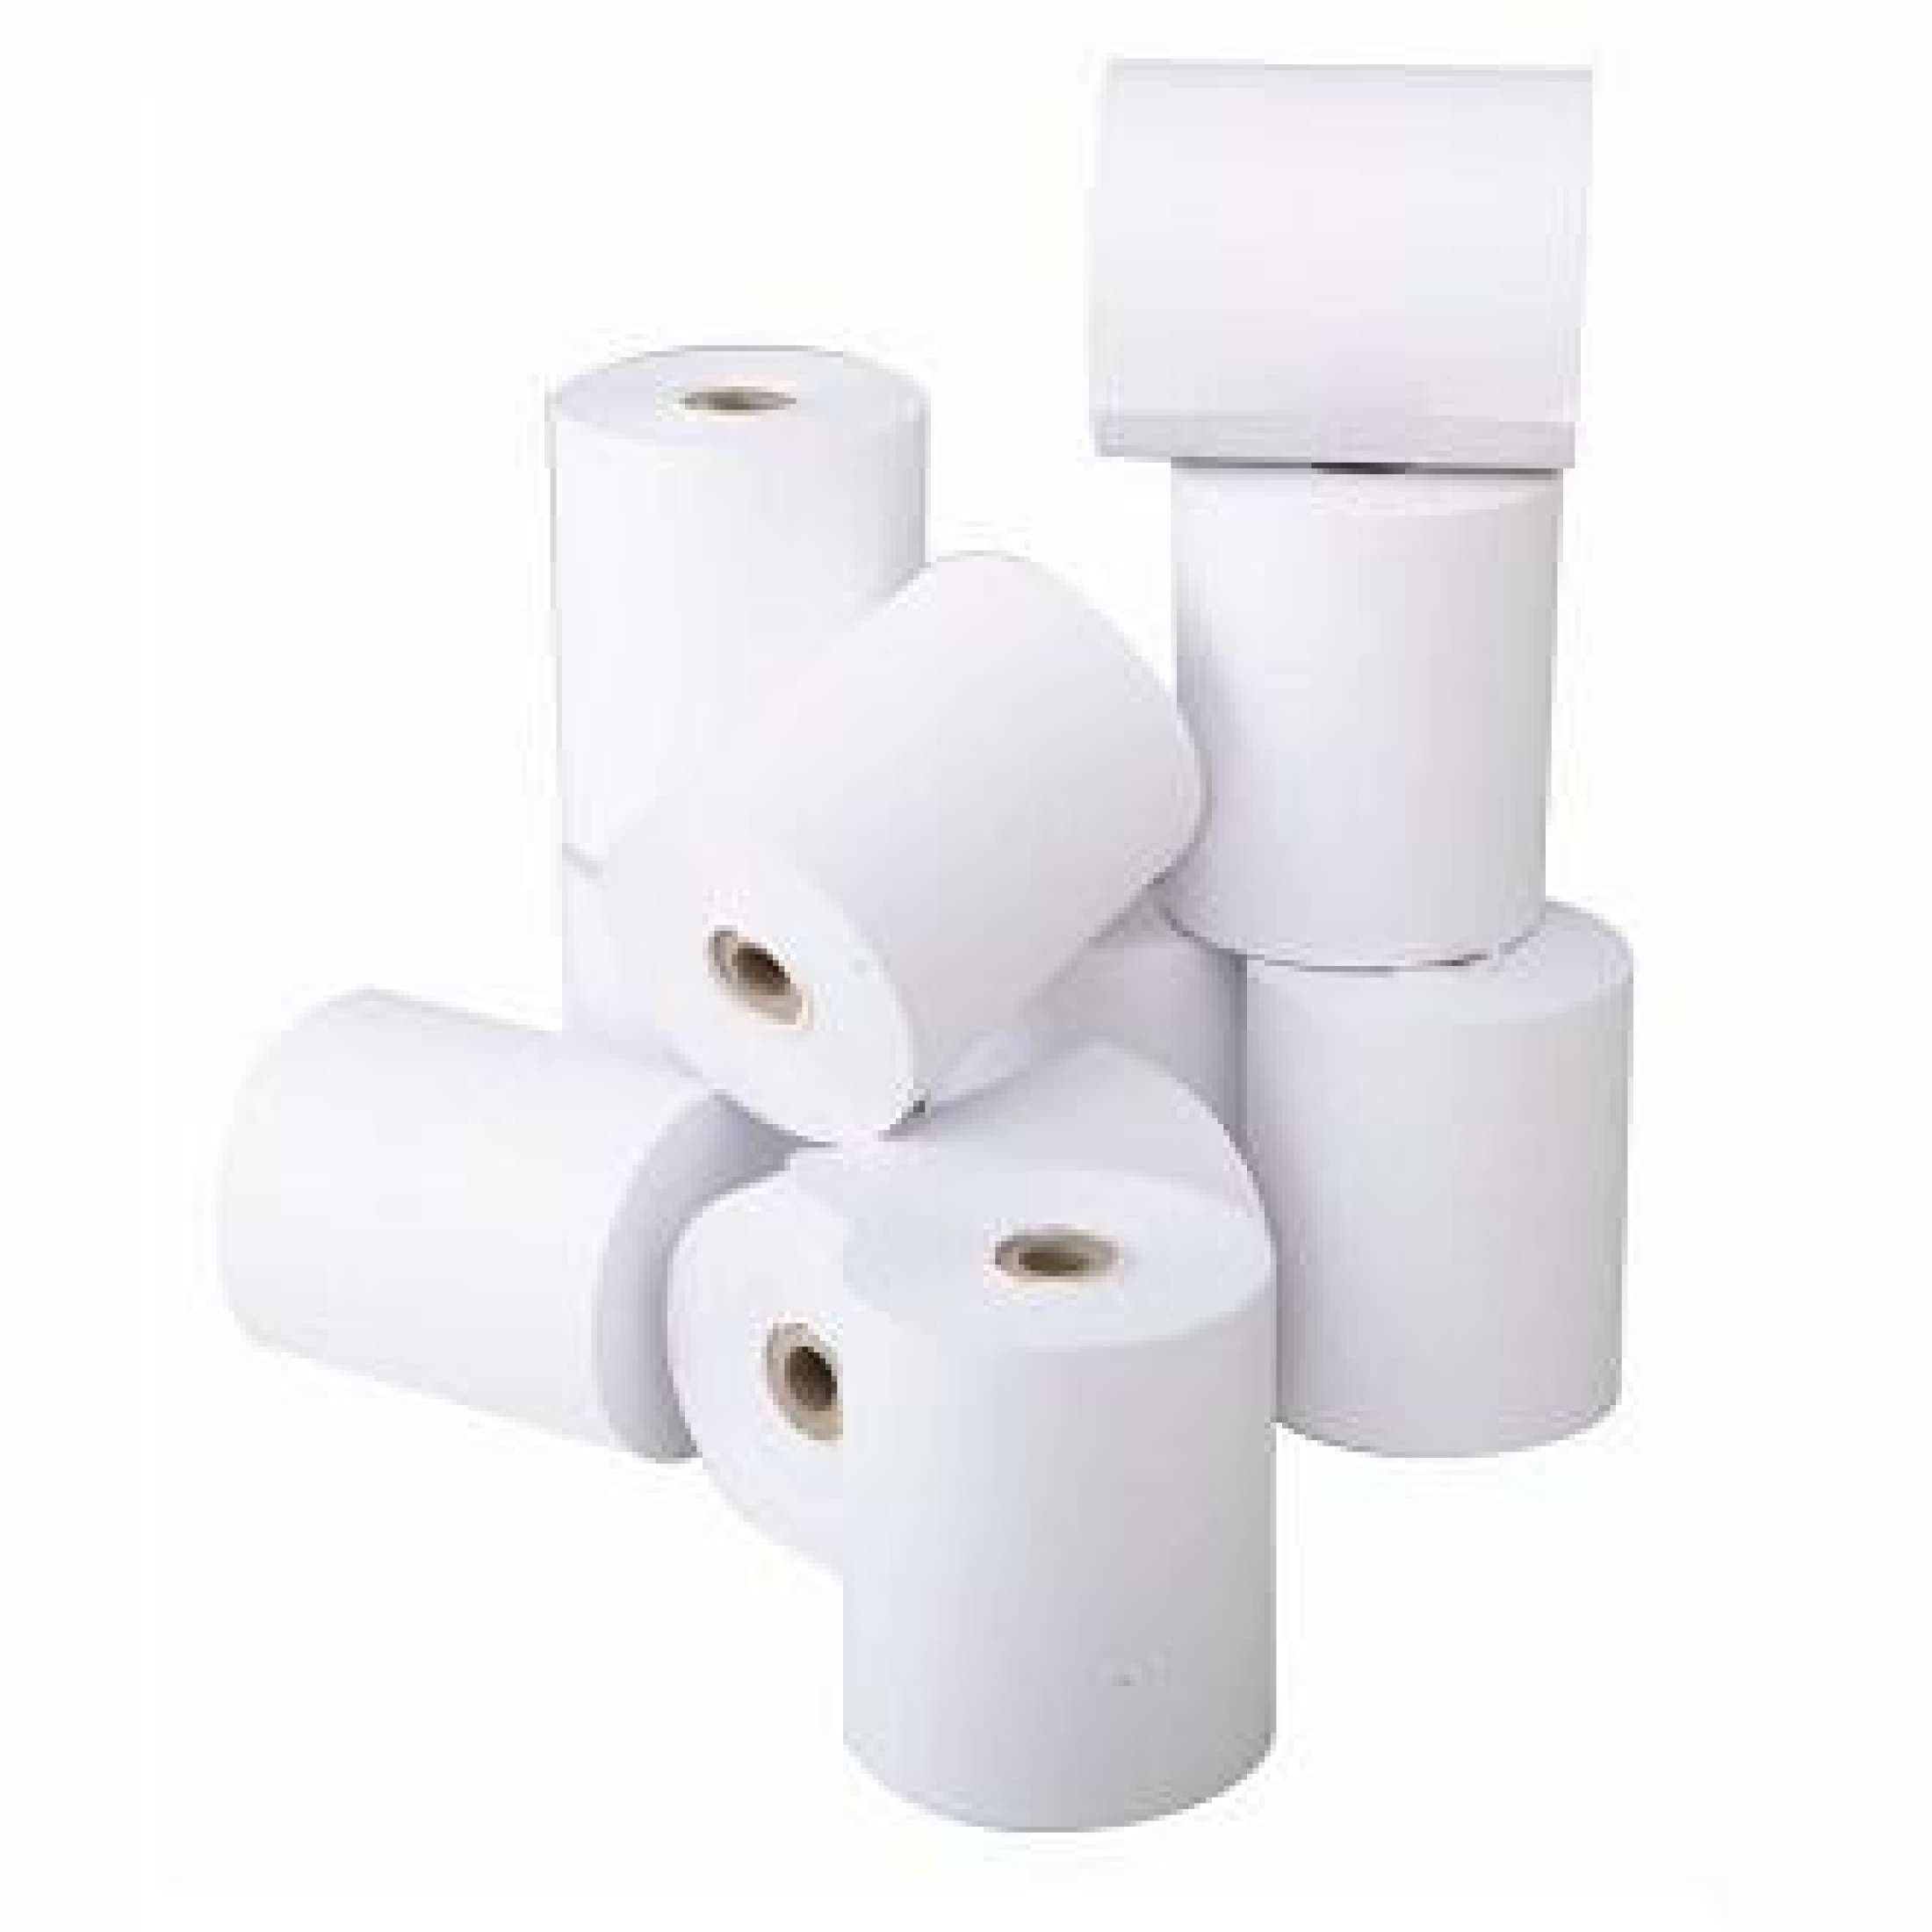 Thermal Roll 3X3 (70M) - White Single Piece